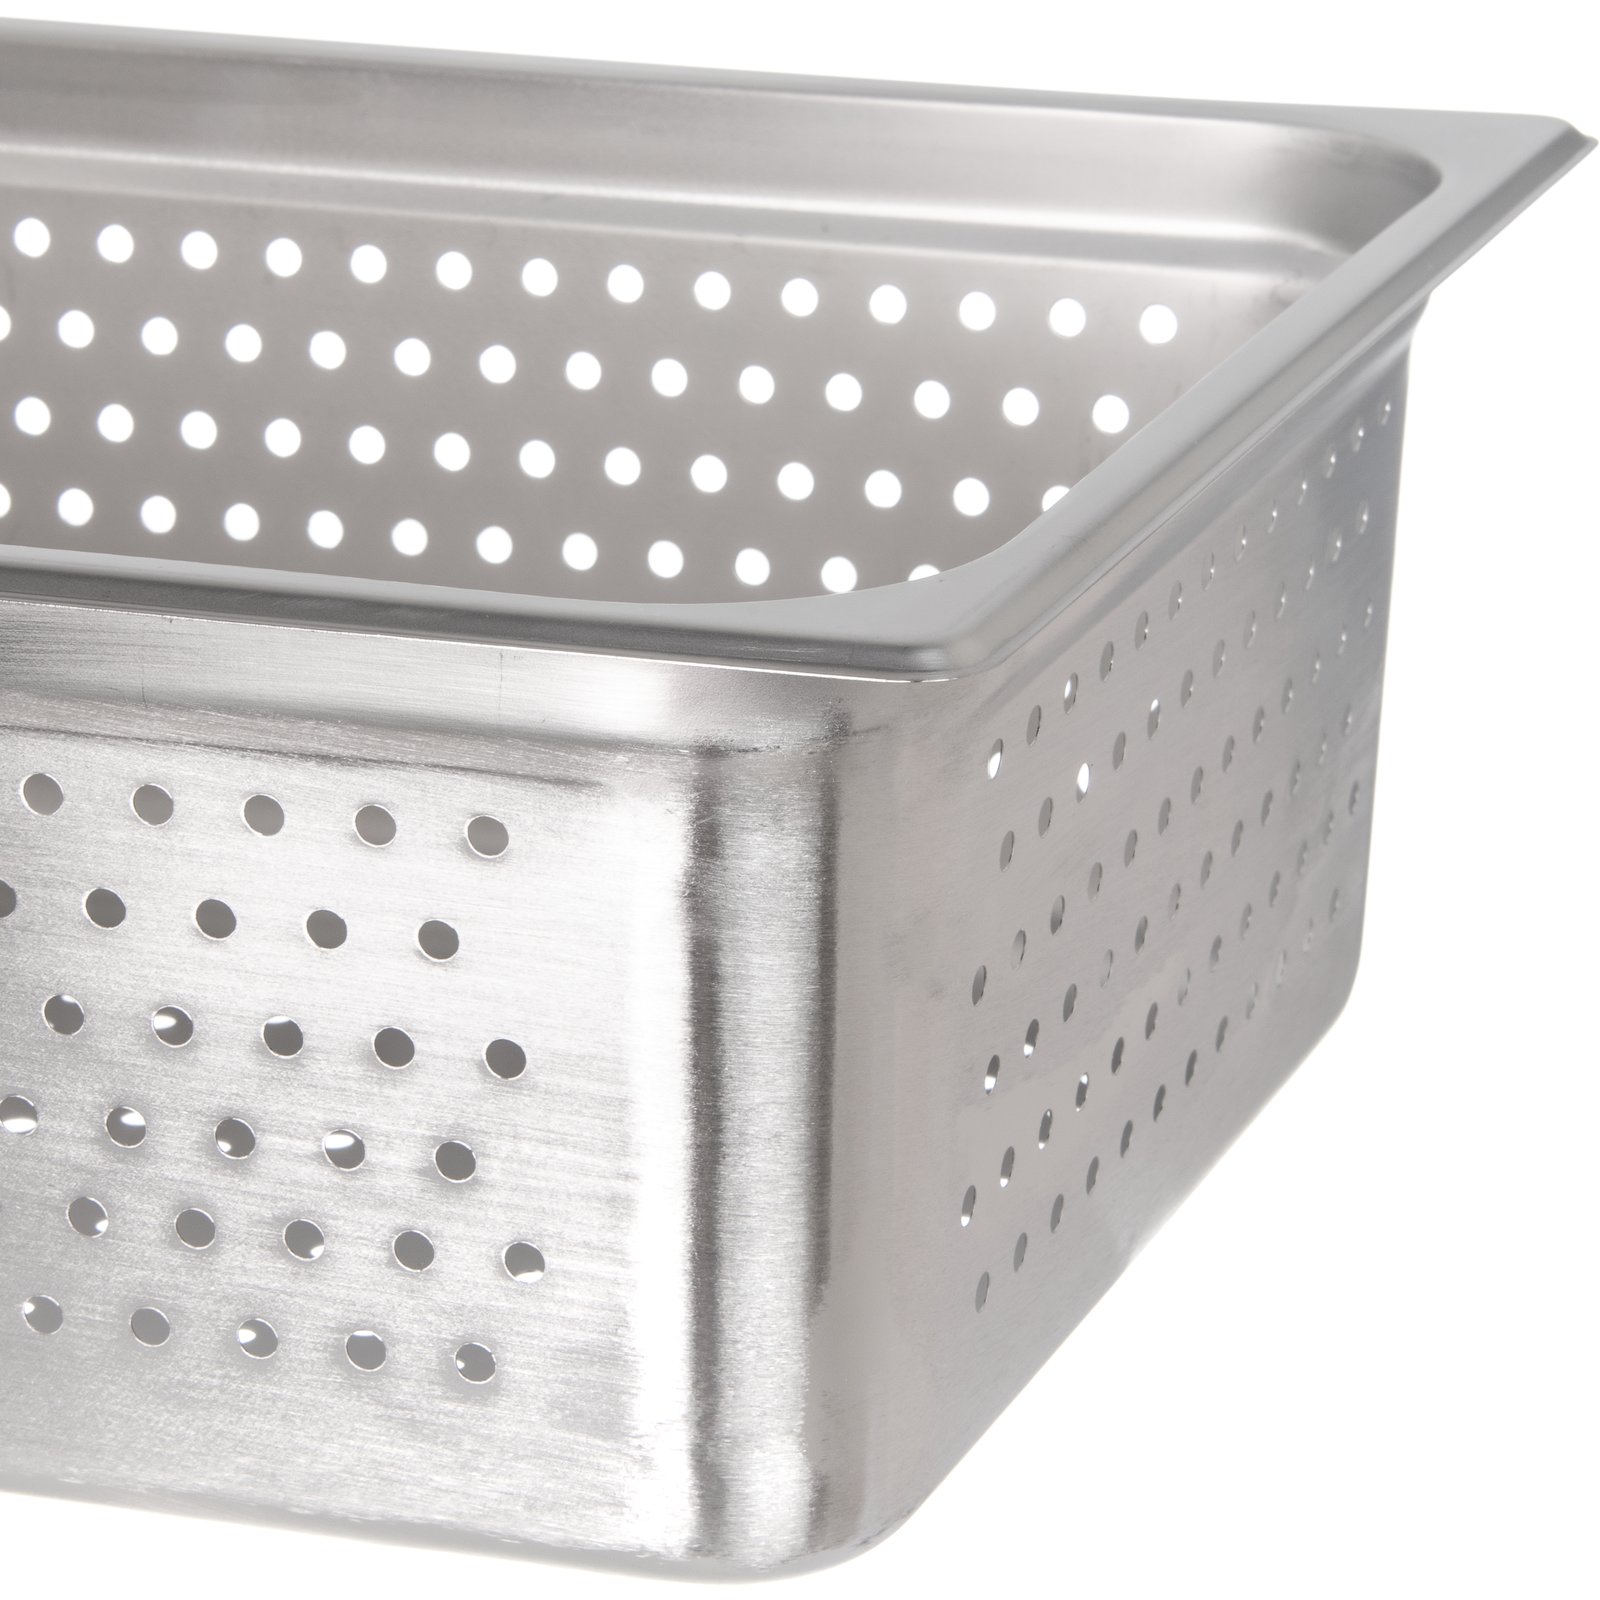 17003100 Extra Large Stainless Steel Pan - Perforated